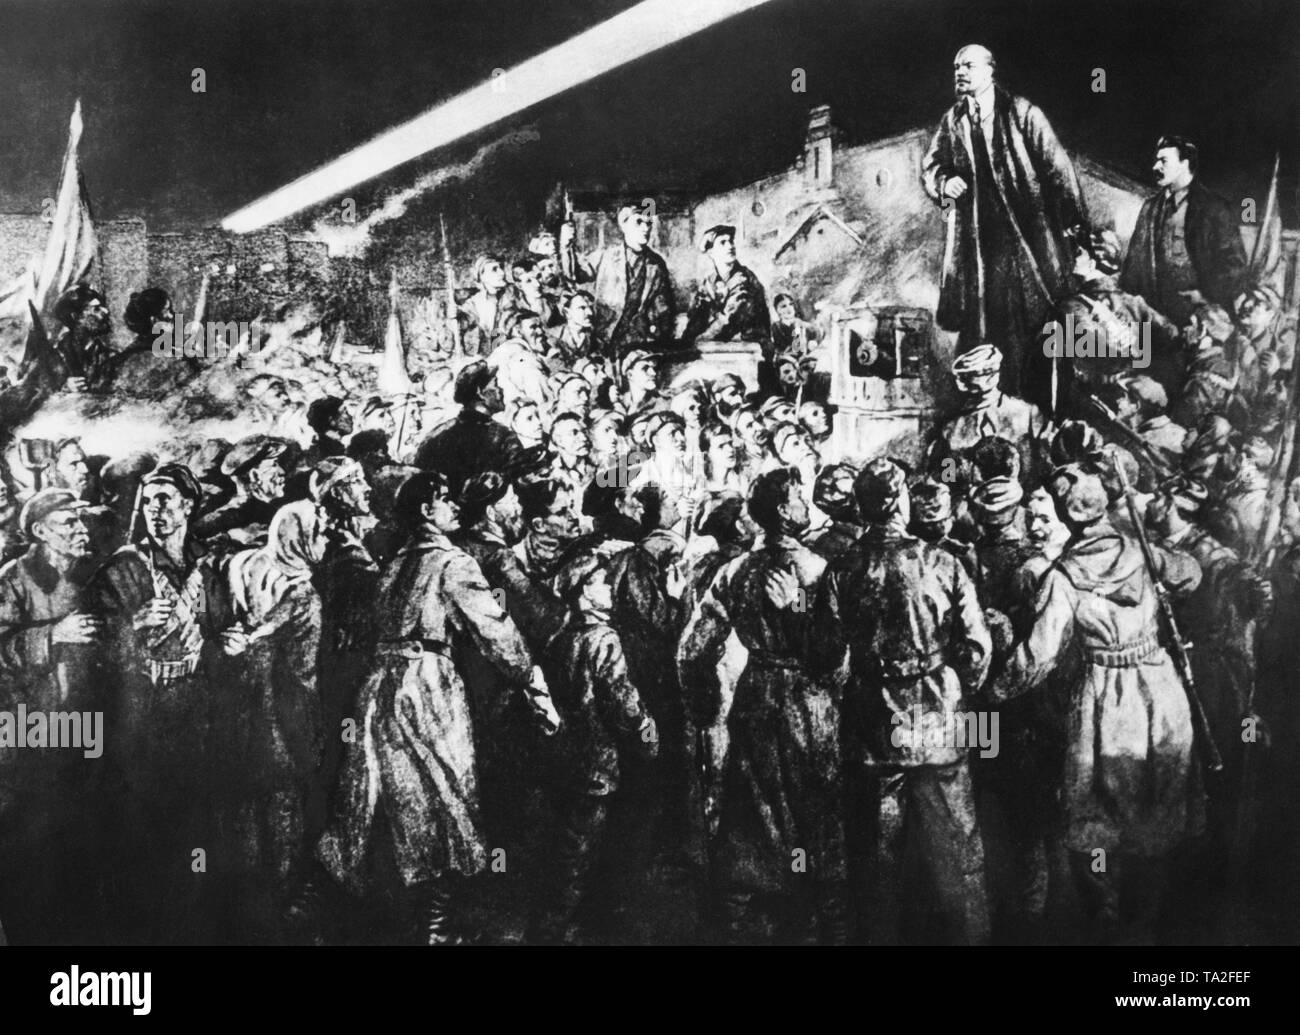 On his return from exile in Finland, Vladimir Ilyich Lenin gives a speech at the railway station in St. Petersburg the evening before the October Revolution. The artist added the figure of Josef Stalin to Lenin's right side. Stock Photo